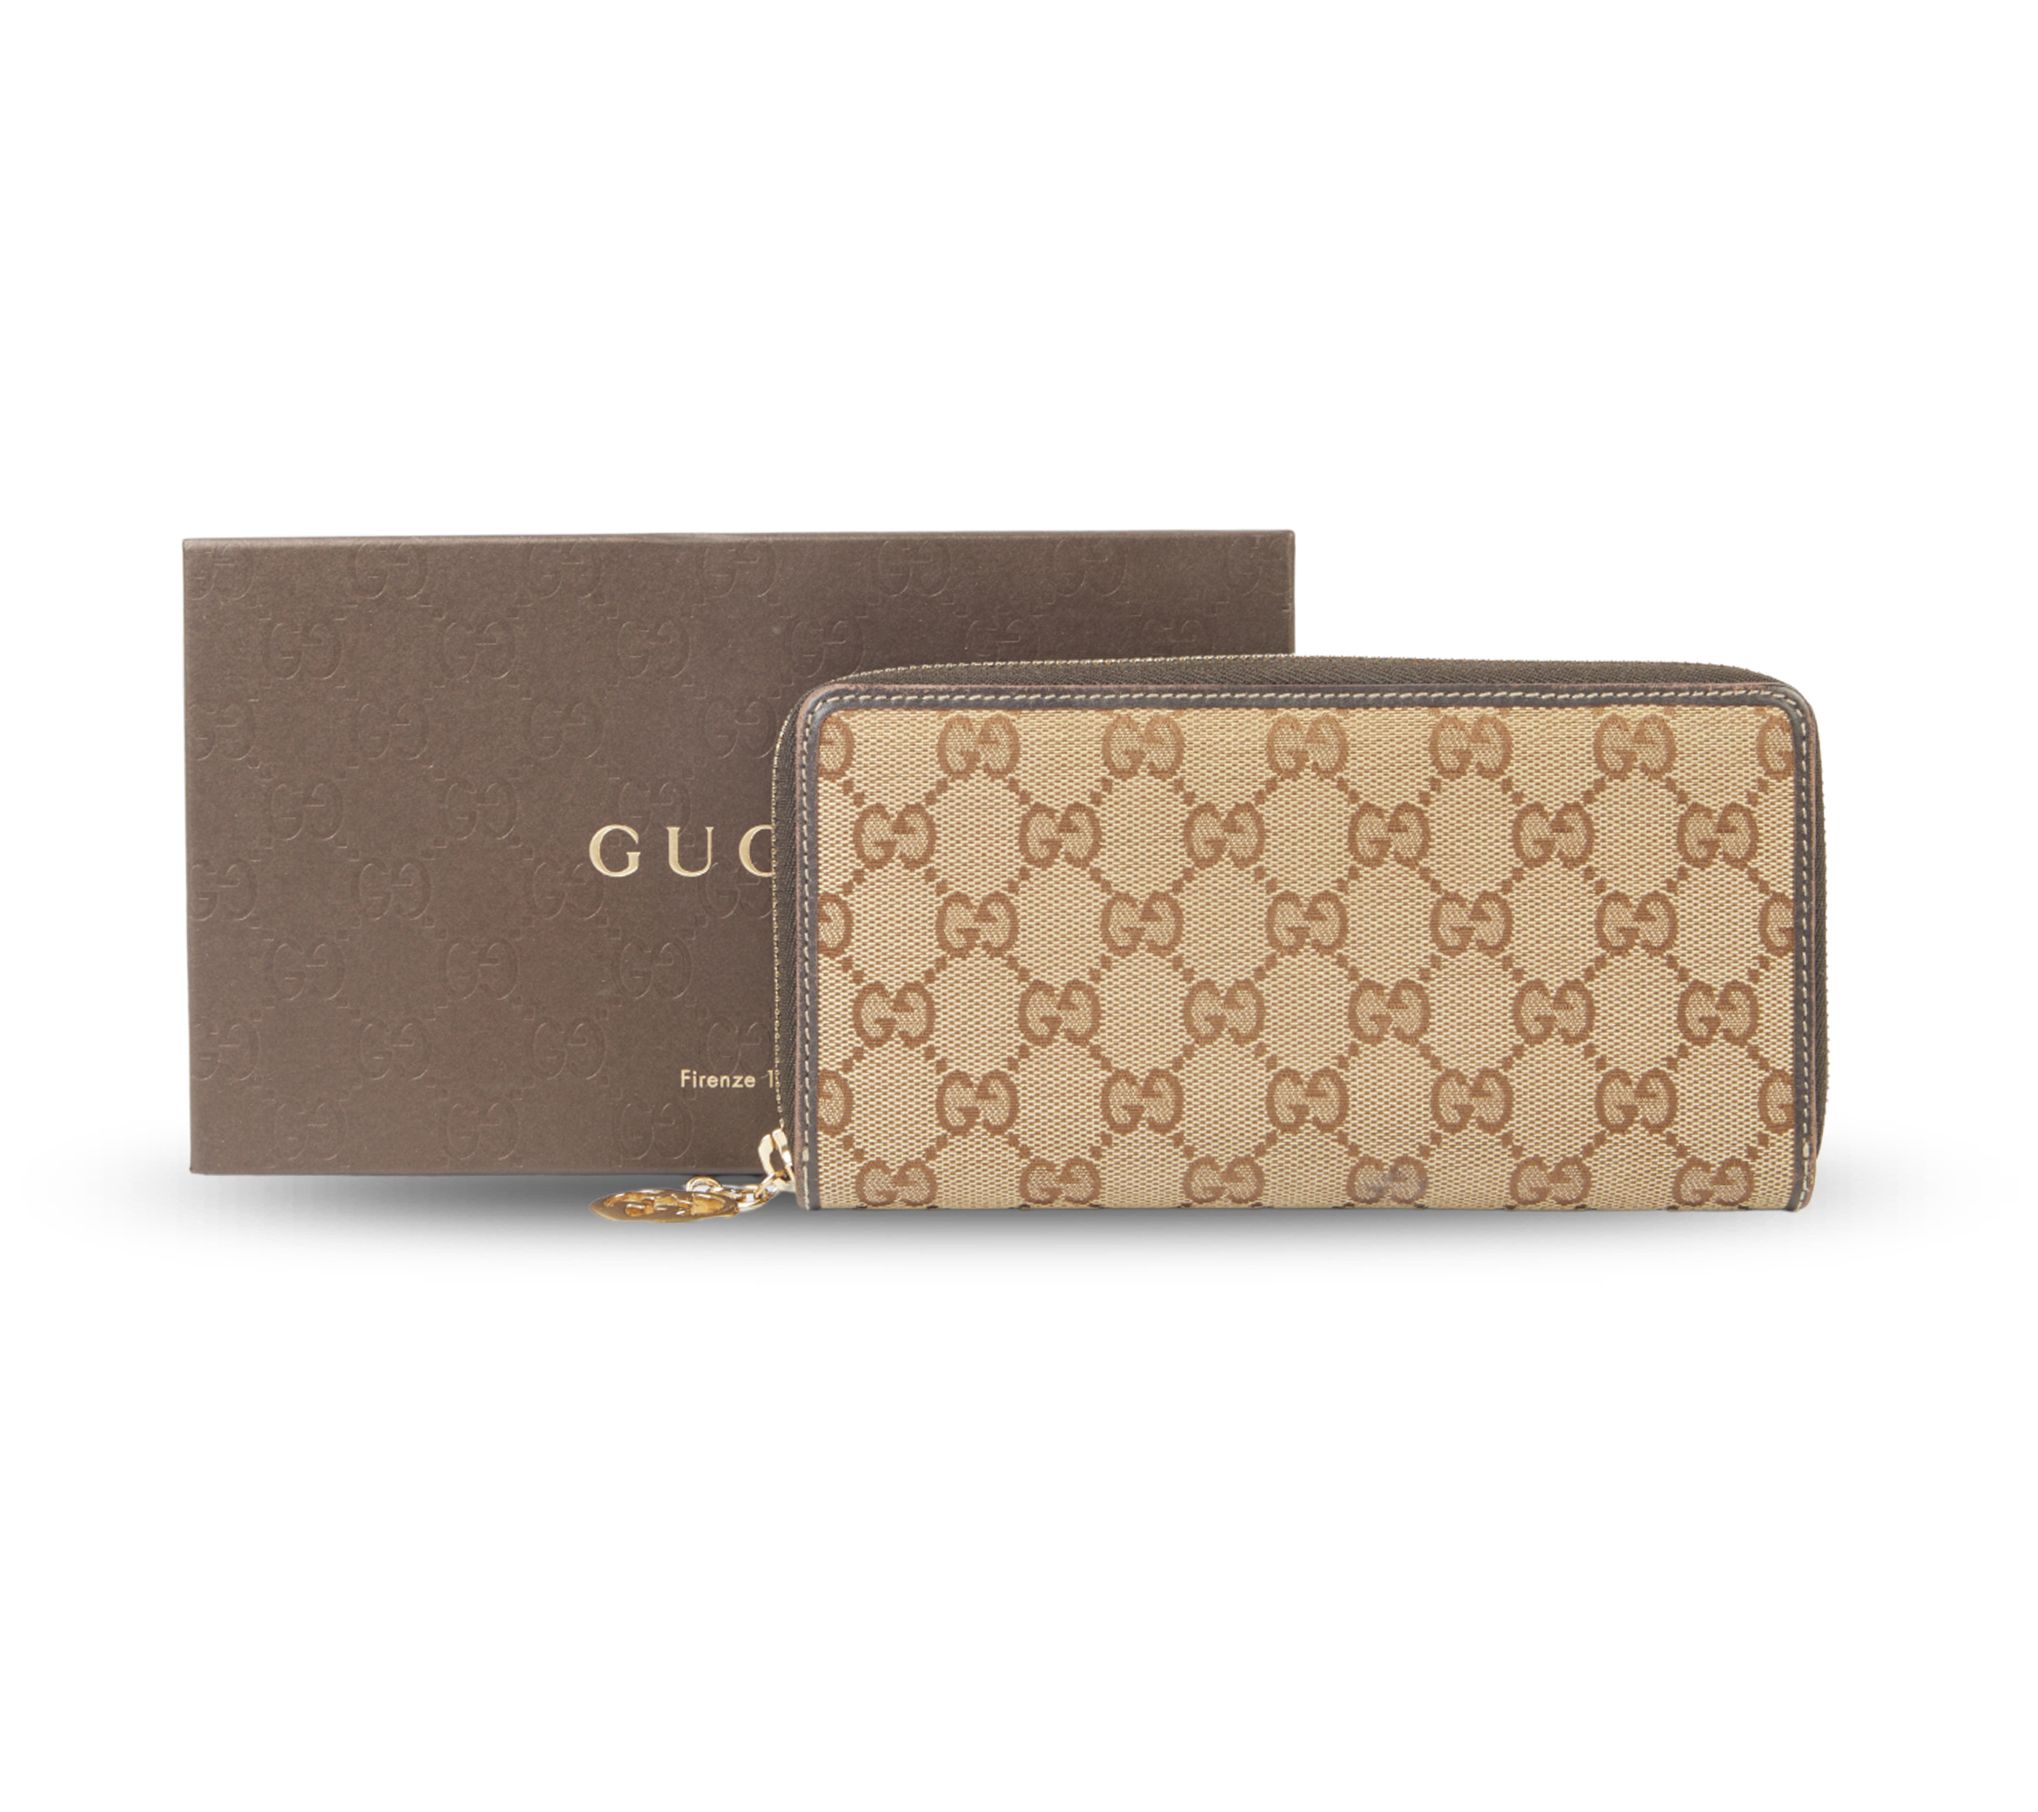 Gucci Wallet preowned good condition 